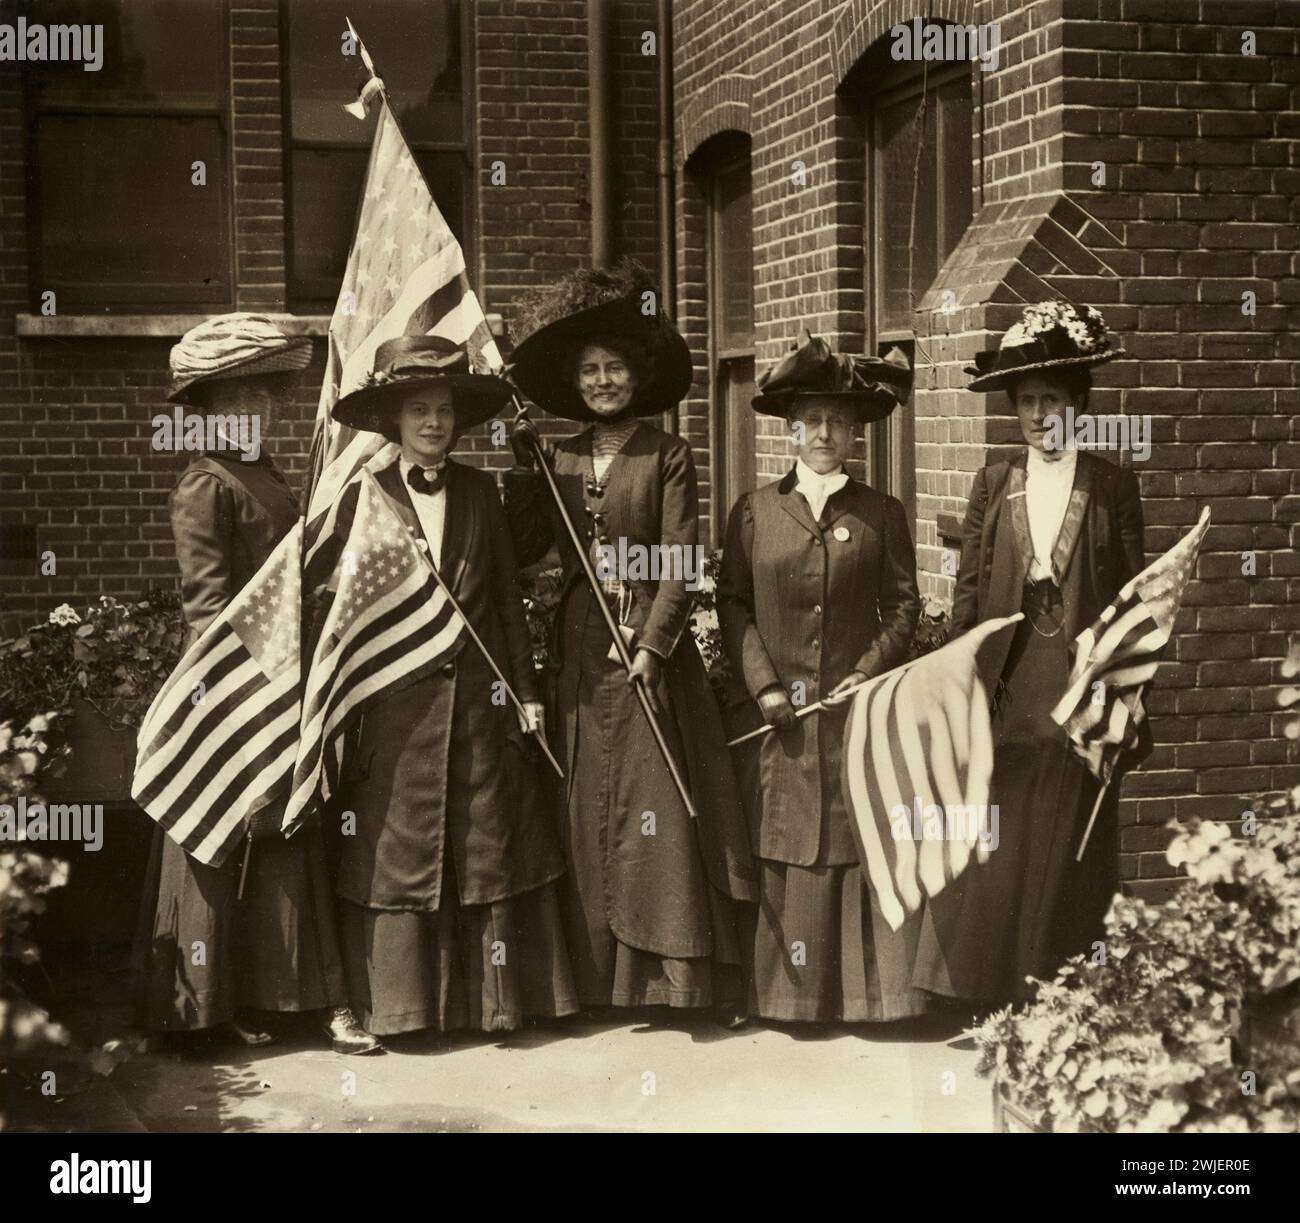 American suffragists, London, England 1910. A group of five women holding American flags;   The women were members of the American contingent that took part in the Women's Social and Political Union’s 23 July 1910 procession.   Reading from left to right they are: Miss Julia Helen Twells, Miss Elizabeth Freeman (organiser of the American movement for Women's Suffrage), Miss Maude Roosevelt (niece of President Roosevelt), Professor Lillien Jane Martin of the Stanford University, California, and Miss Ada Wright', Stock Photo